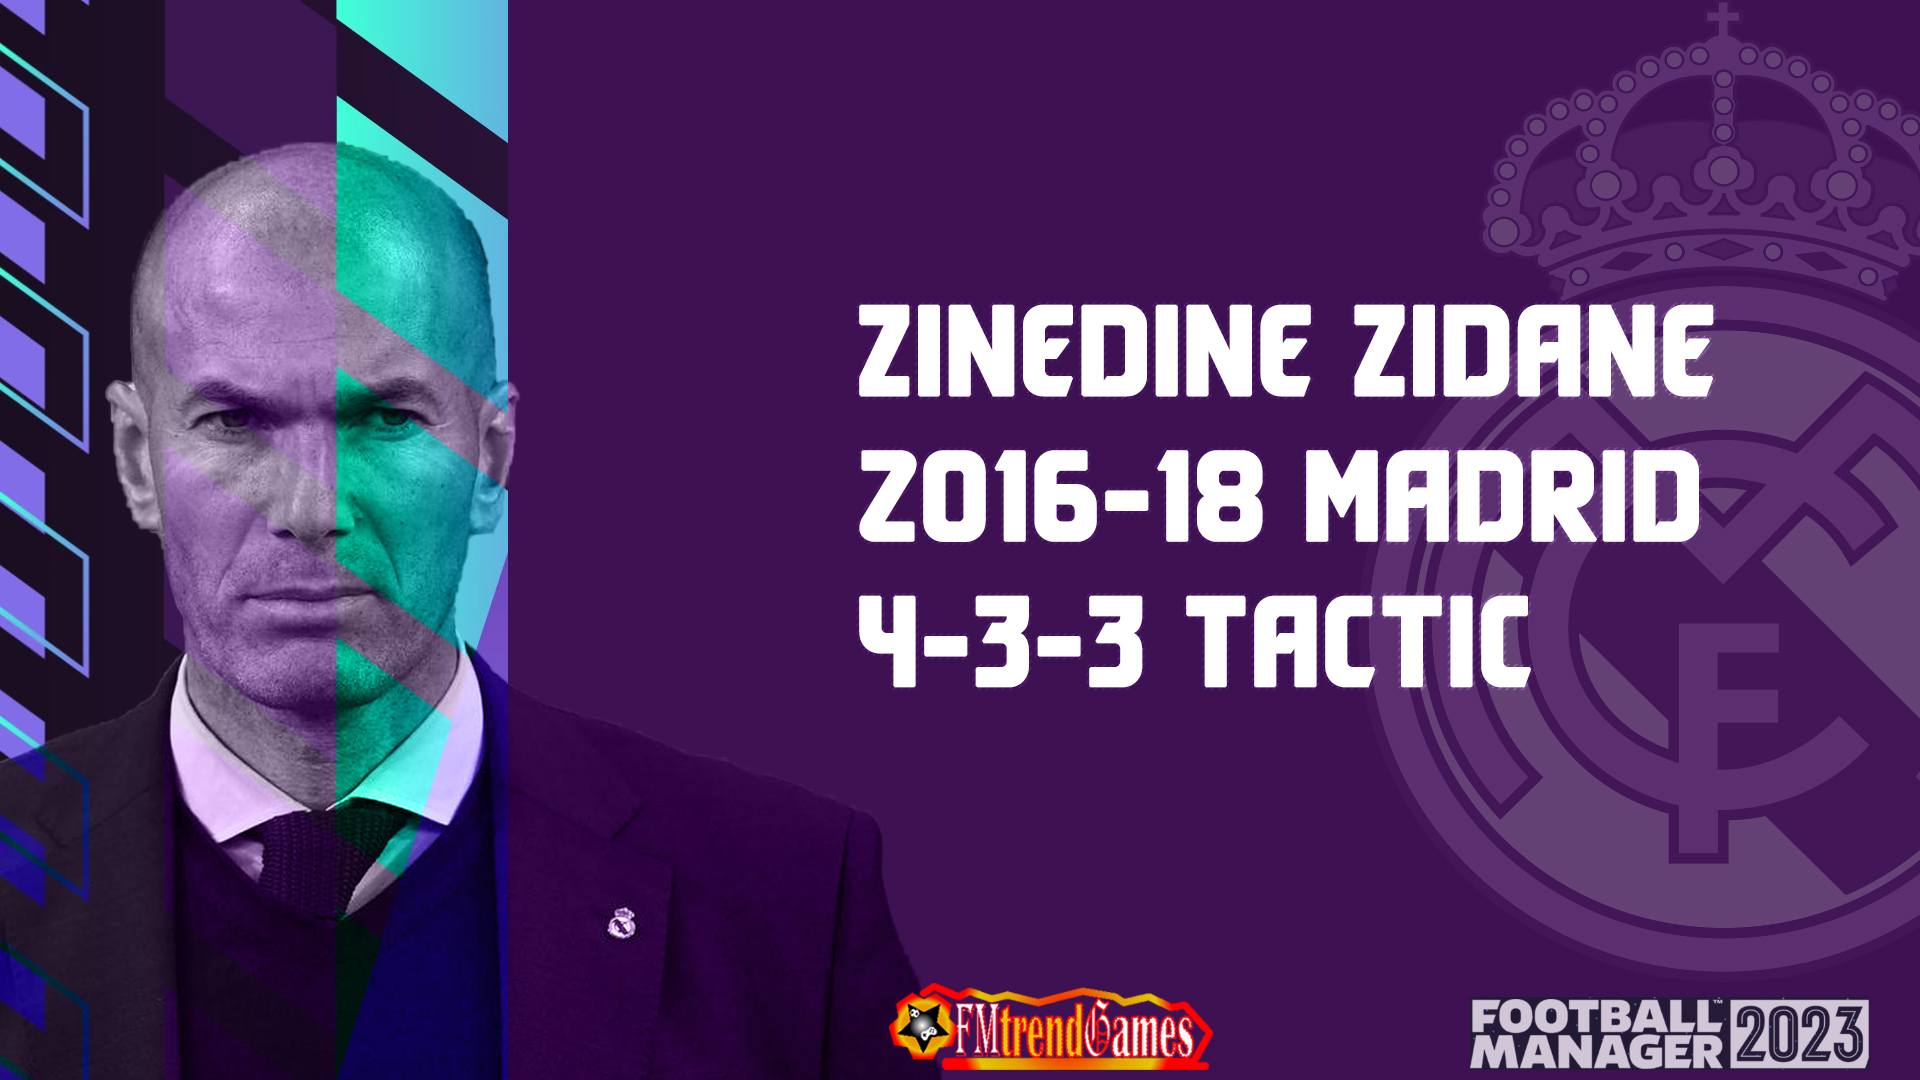 FM23 Zinedine Zidane 2016-18 4-3-3 Tactic at Madrid | Tested with FM23 ...